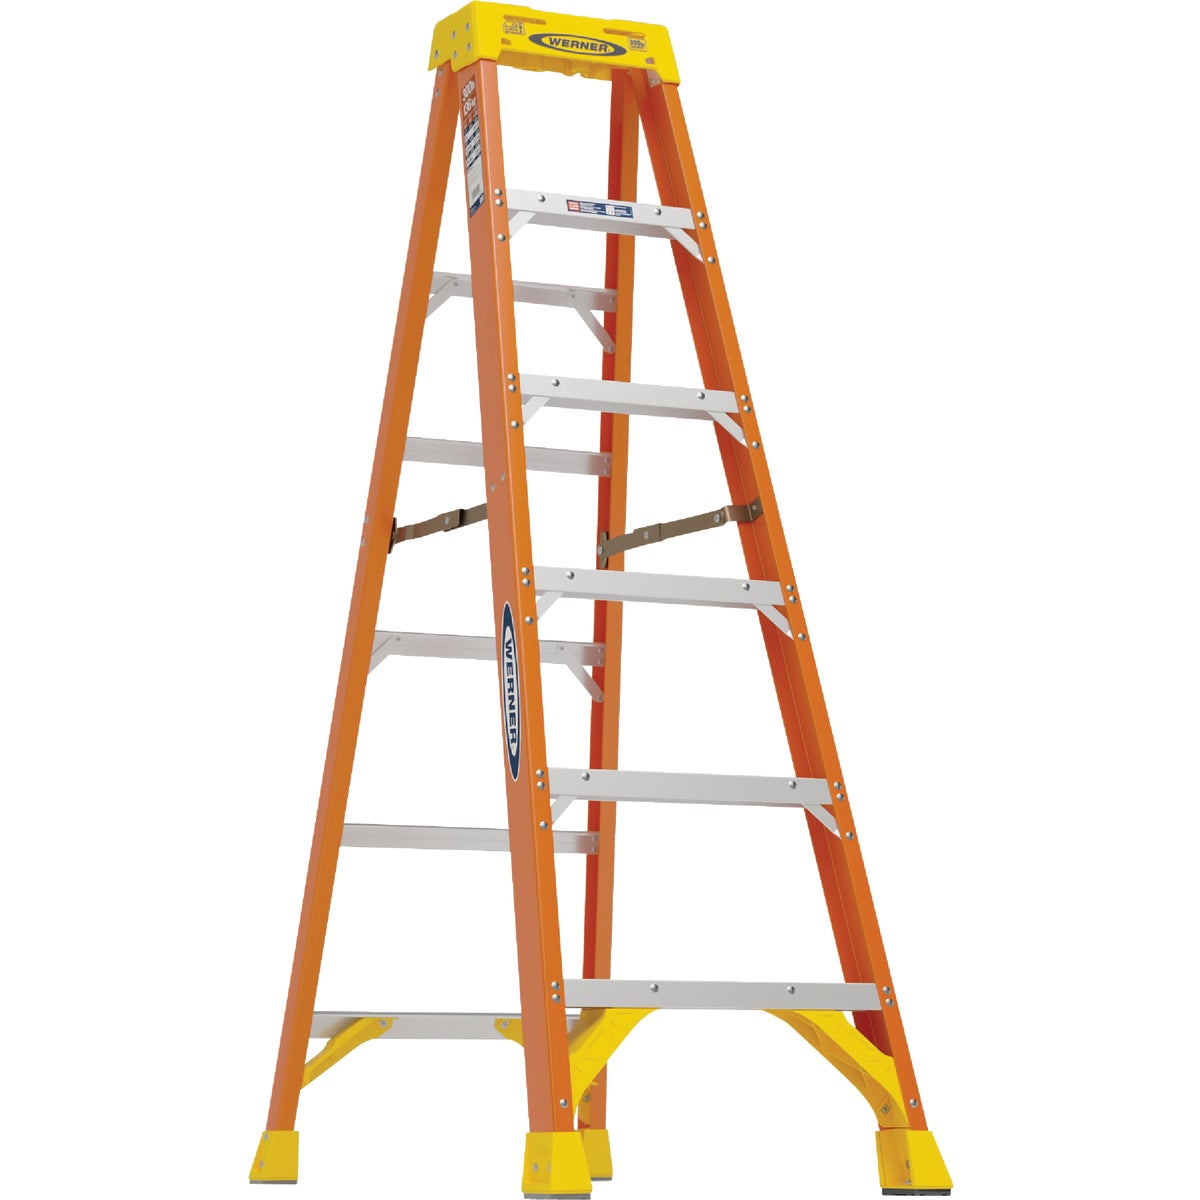 Werner 6 Ft. Fiberglass Step Ladder with 300 Lb. Load Capacity Type IA Ladder Rating